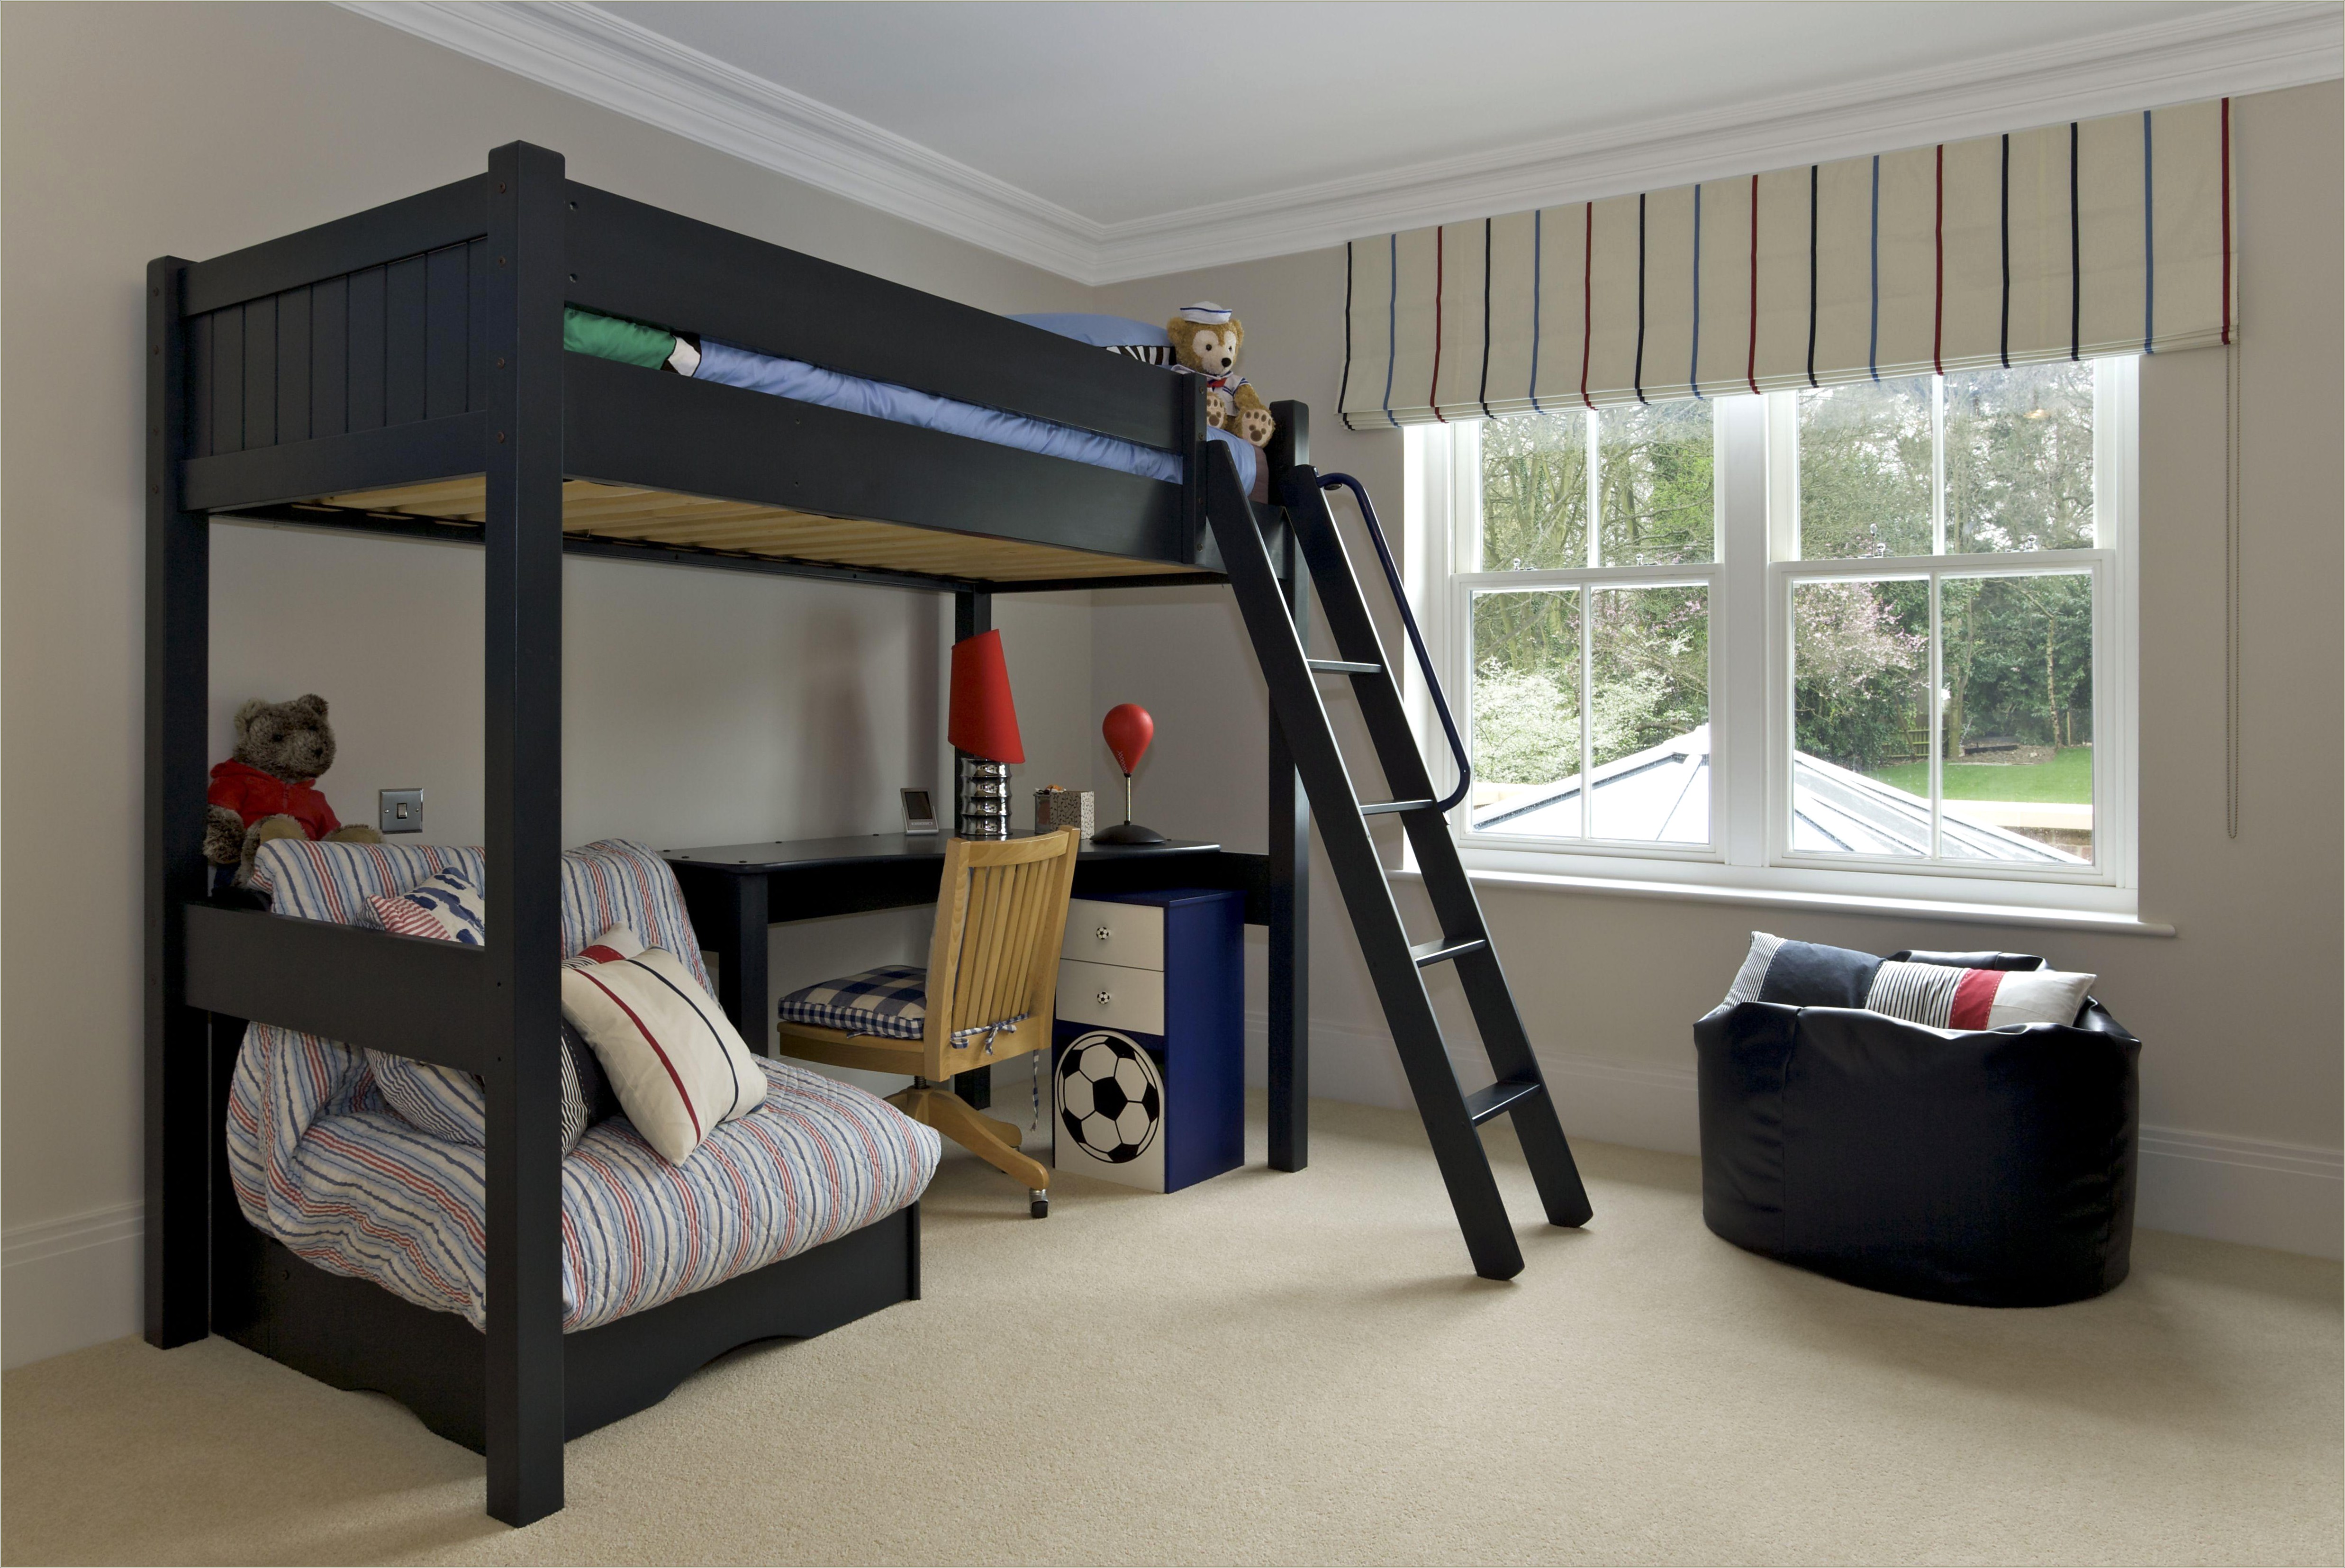 Free Design Templates For Built In Bunk Bed